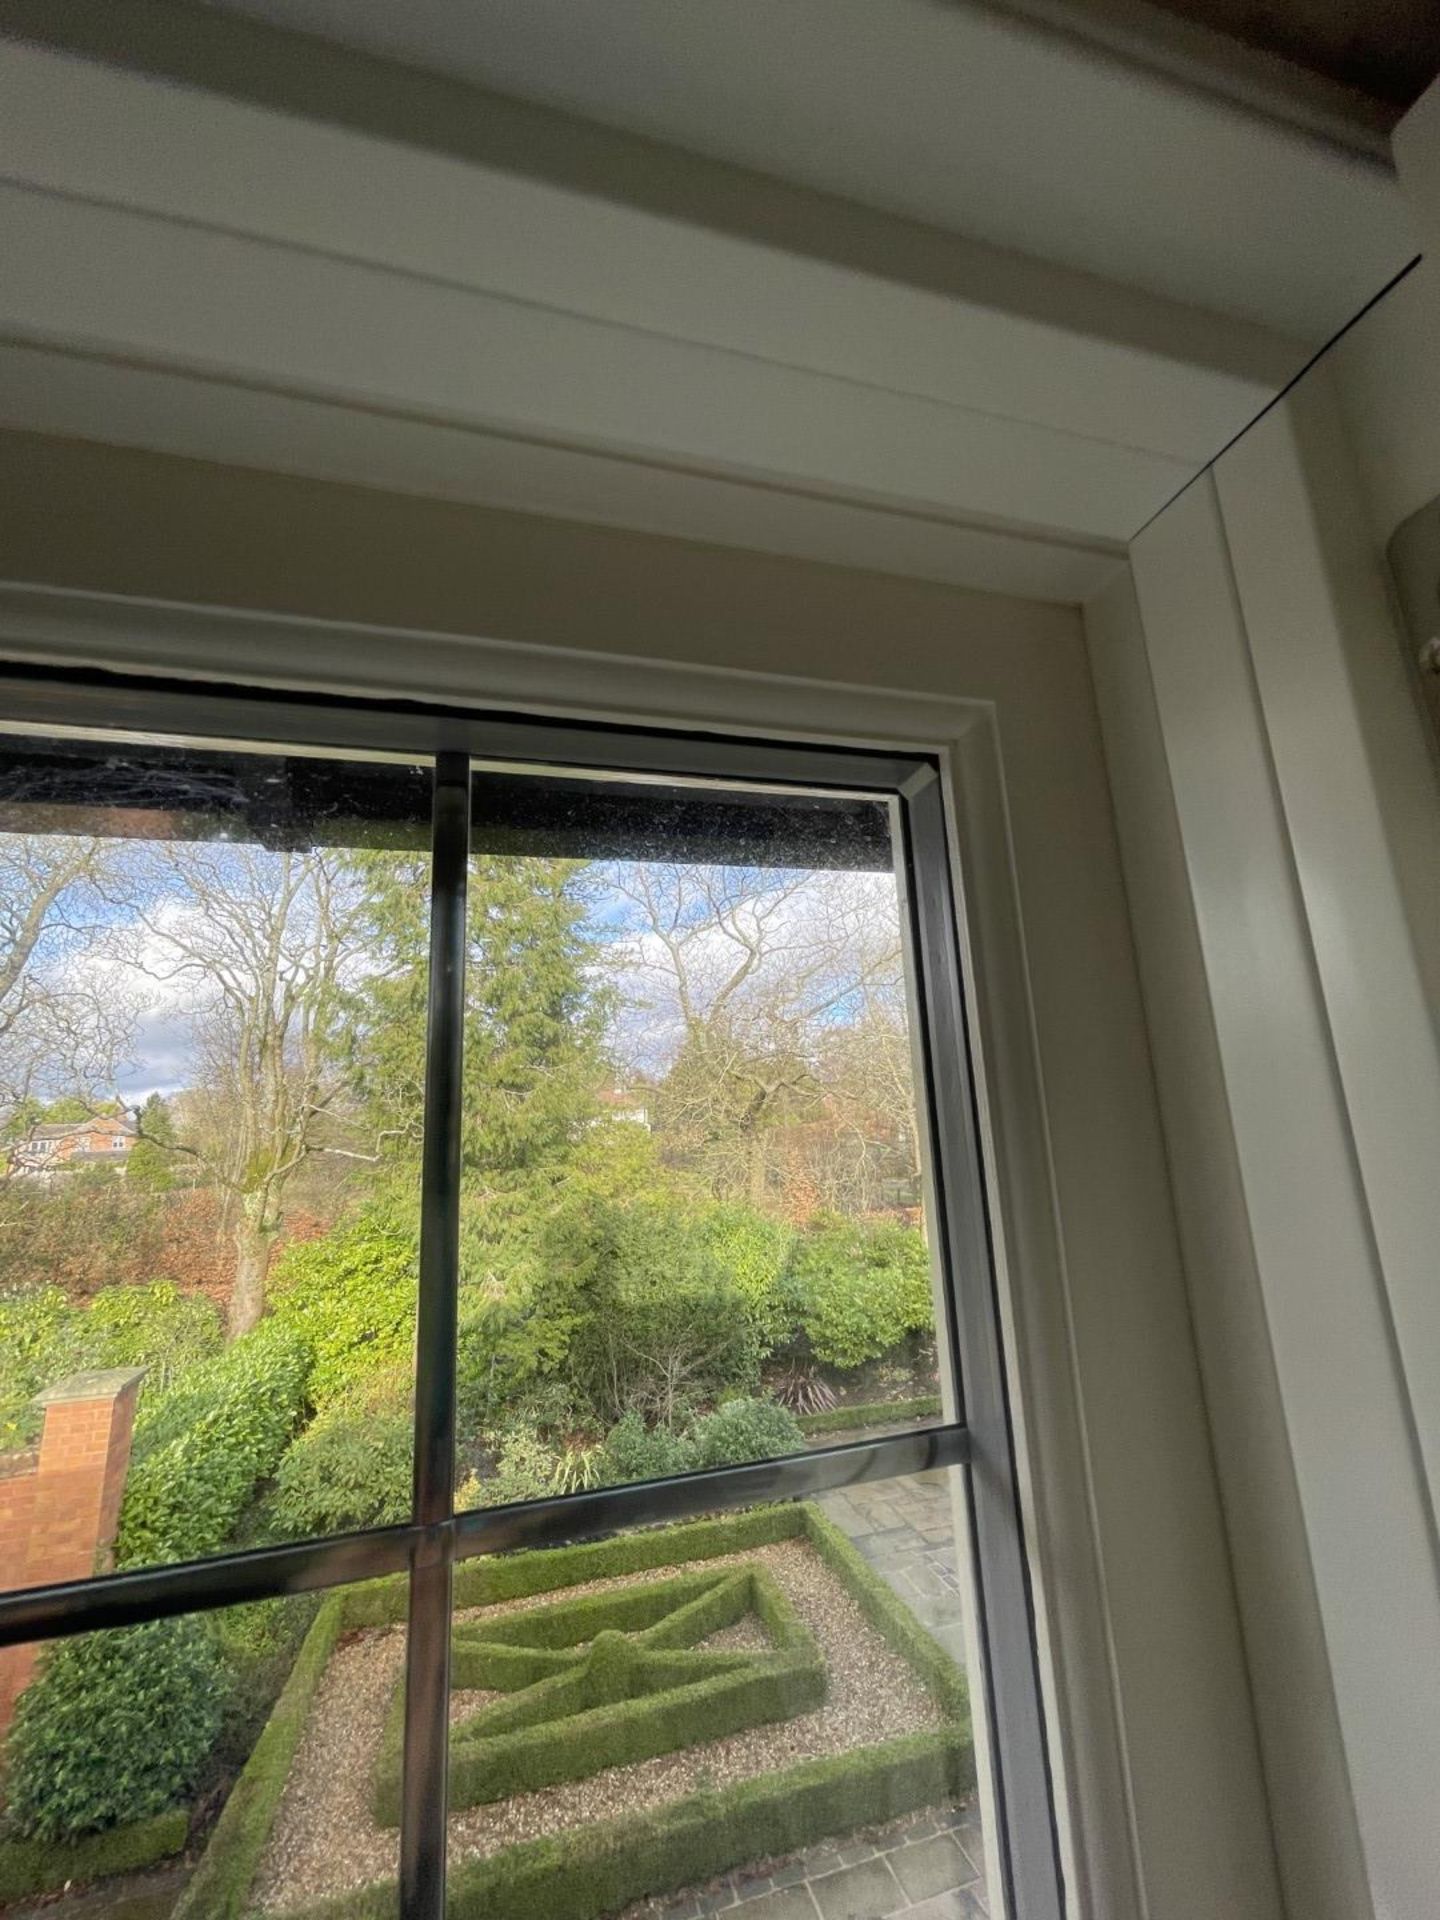 1 x Hardwood Timber Double Glazed Leaded 3-Pane Window Frame fitted with Shutter Blinds - Image 15 of 15